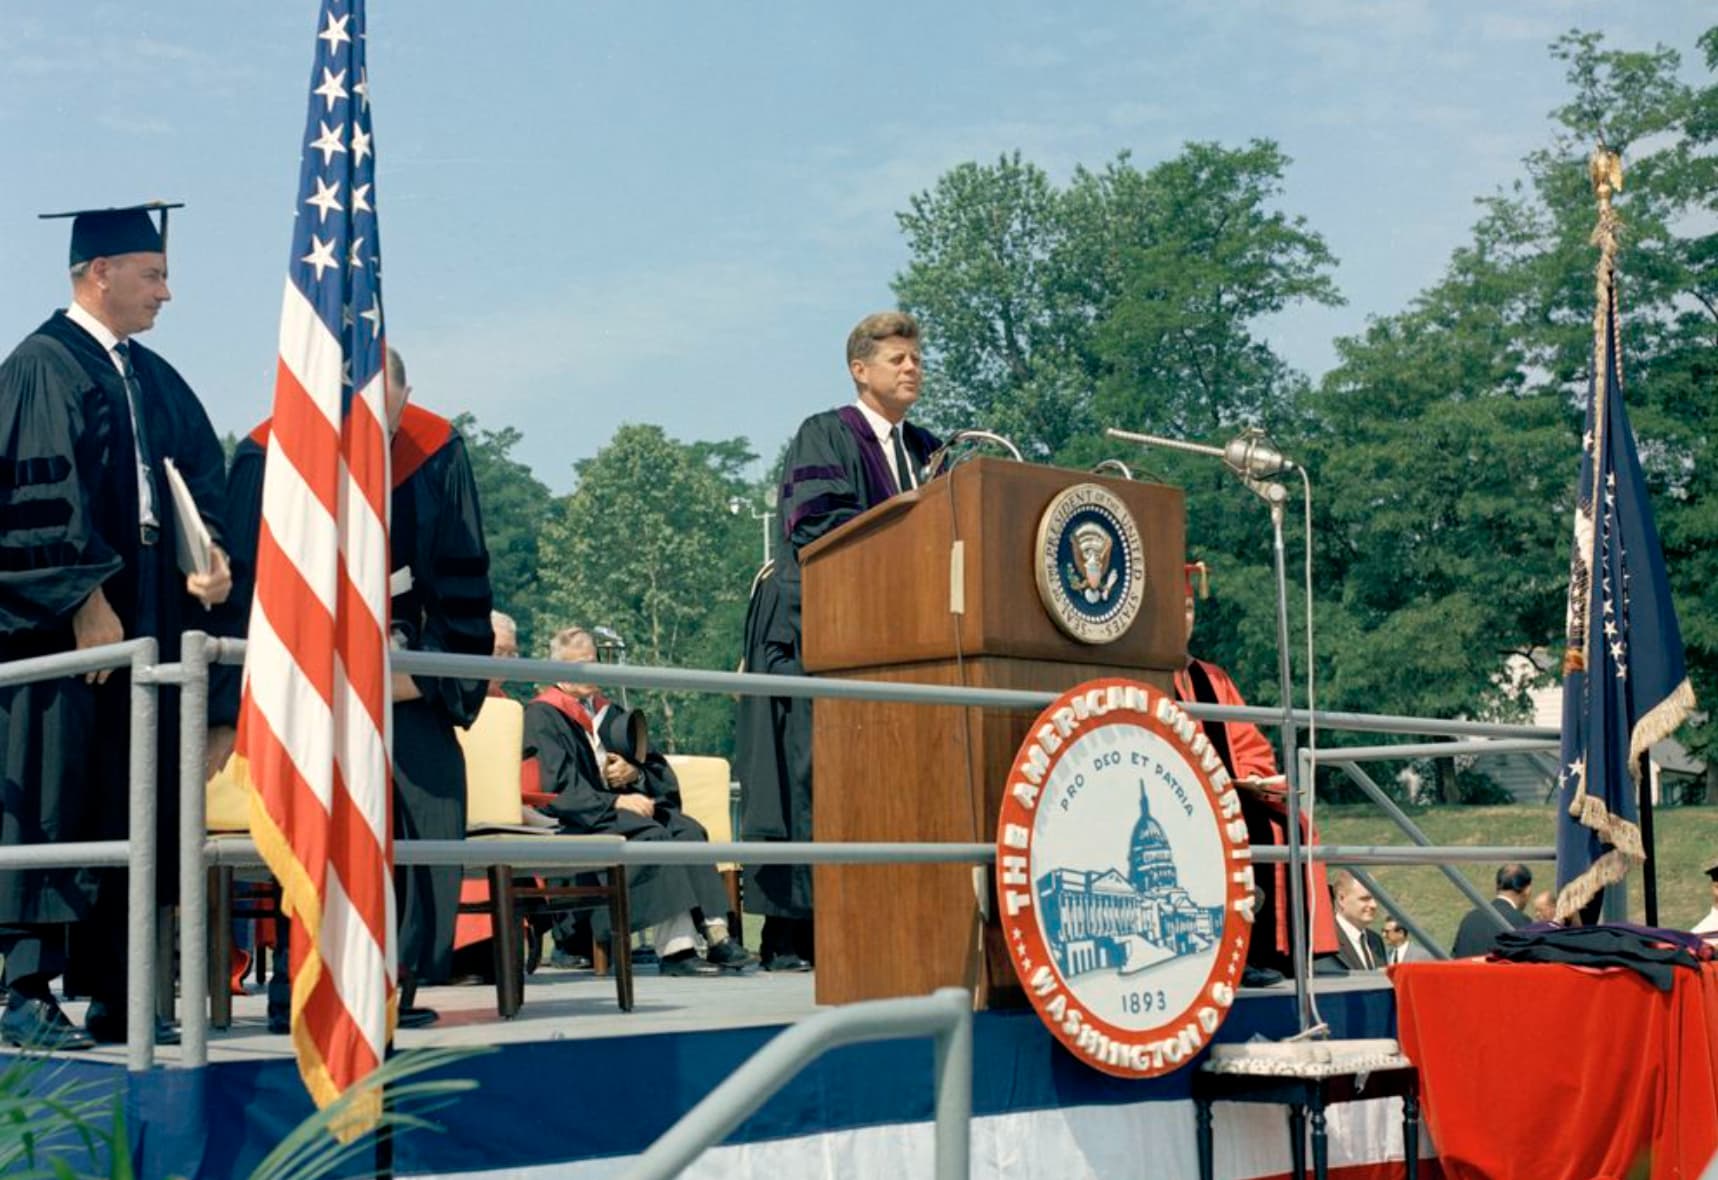 President John F. Kennedy gave the commencement address in 1963.